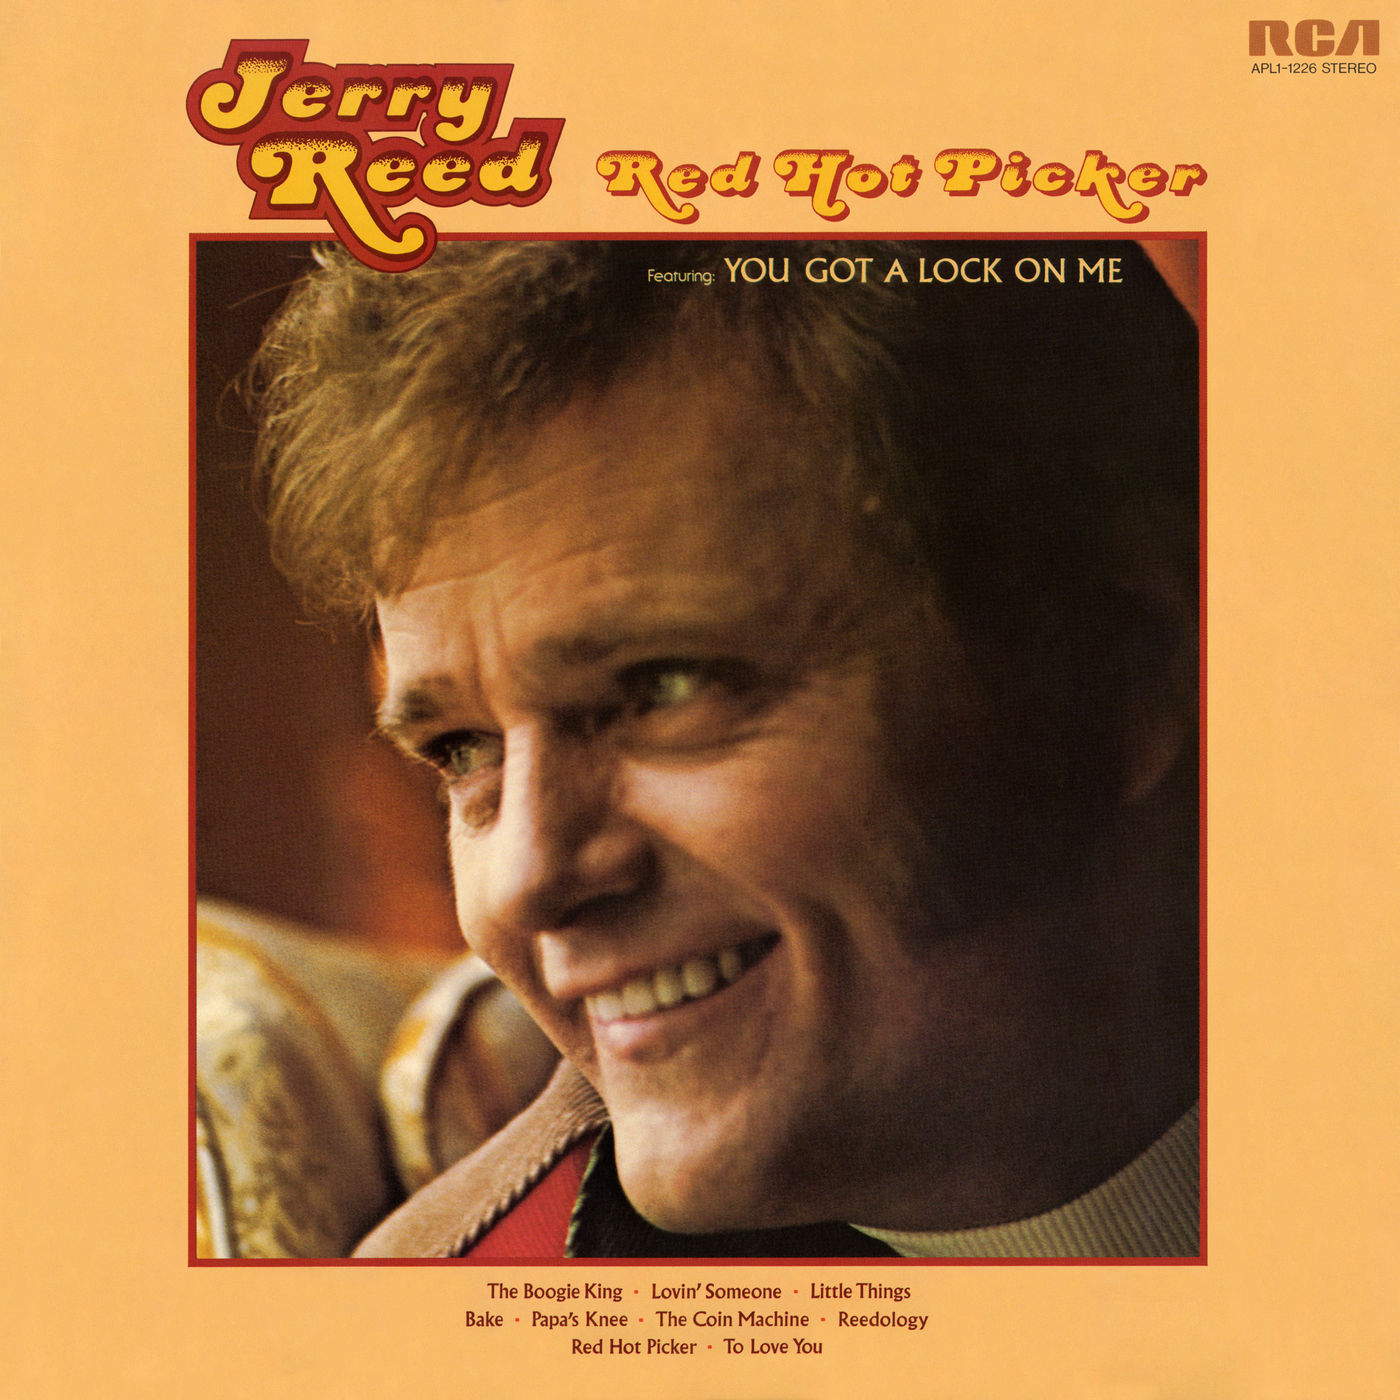 Jerry Reed – Red Hot Picker